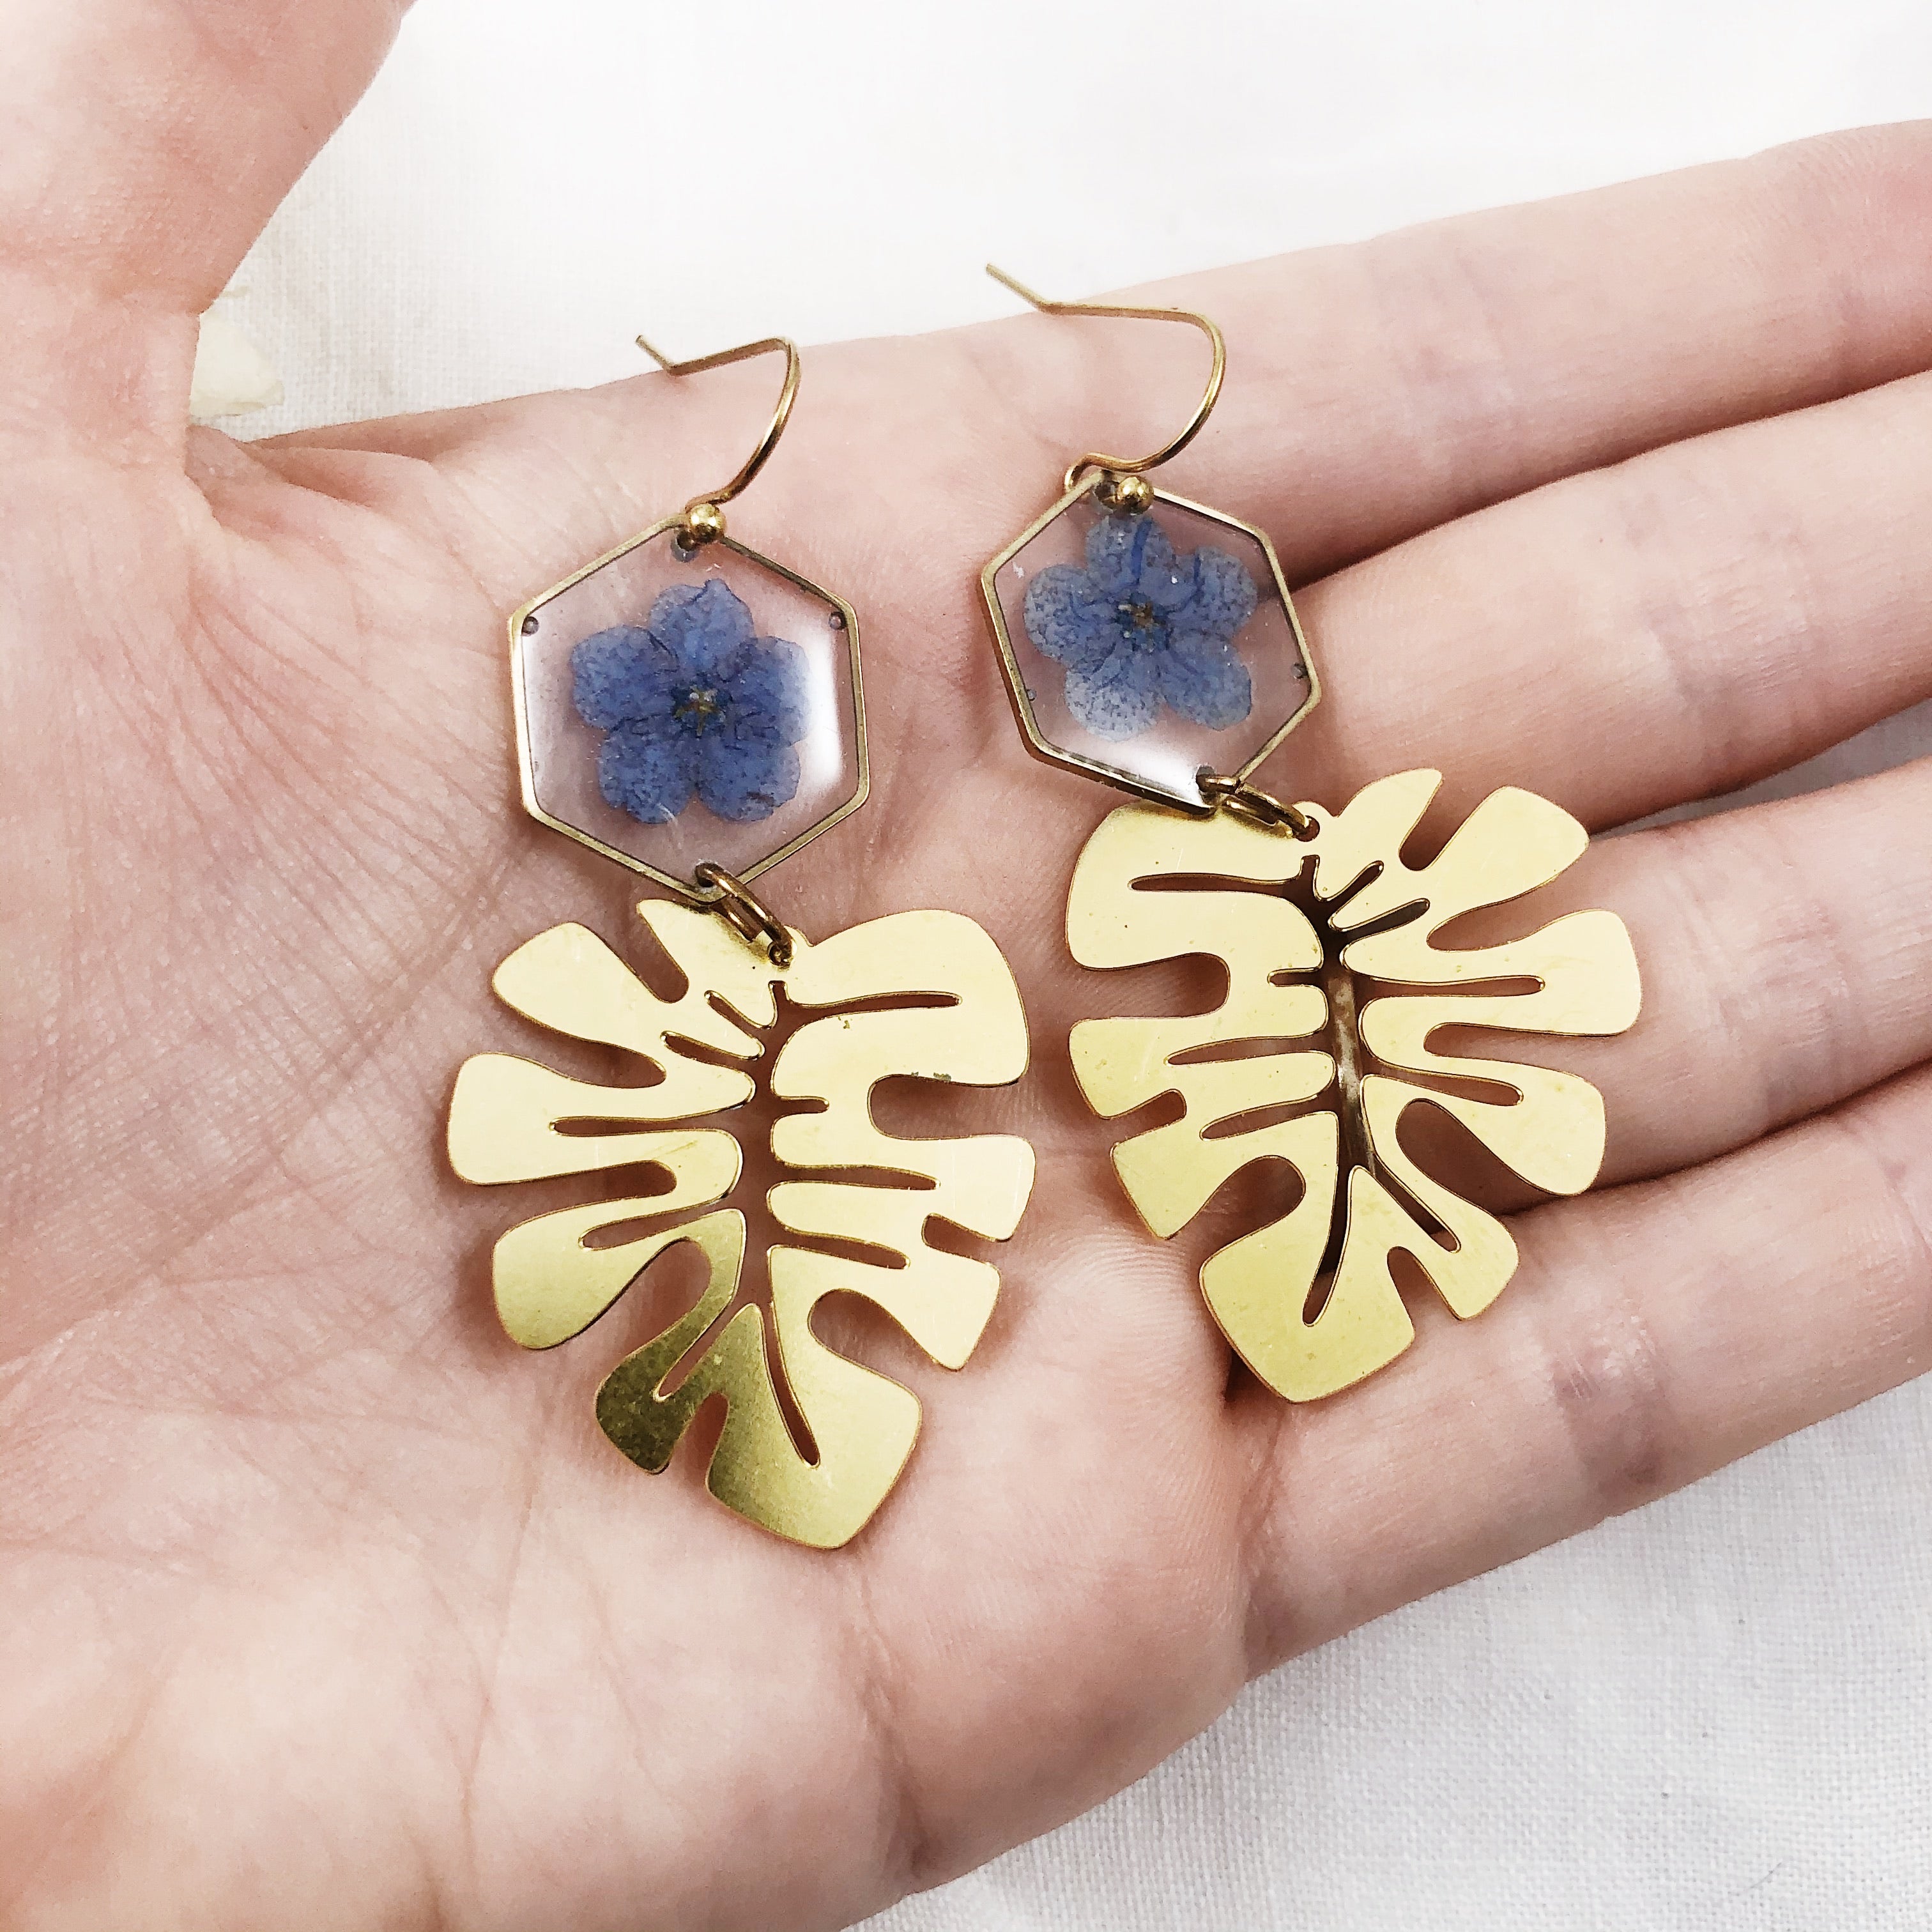 Brass Forget Me Not Earrings with Leaf Charms